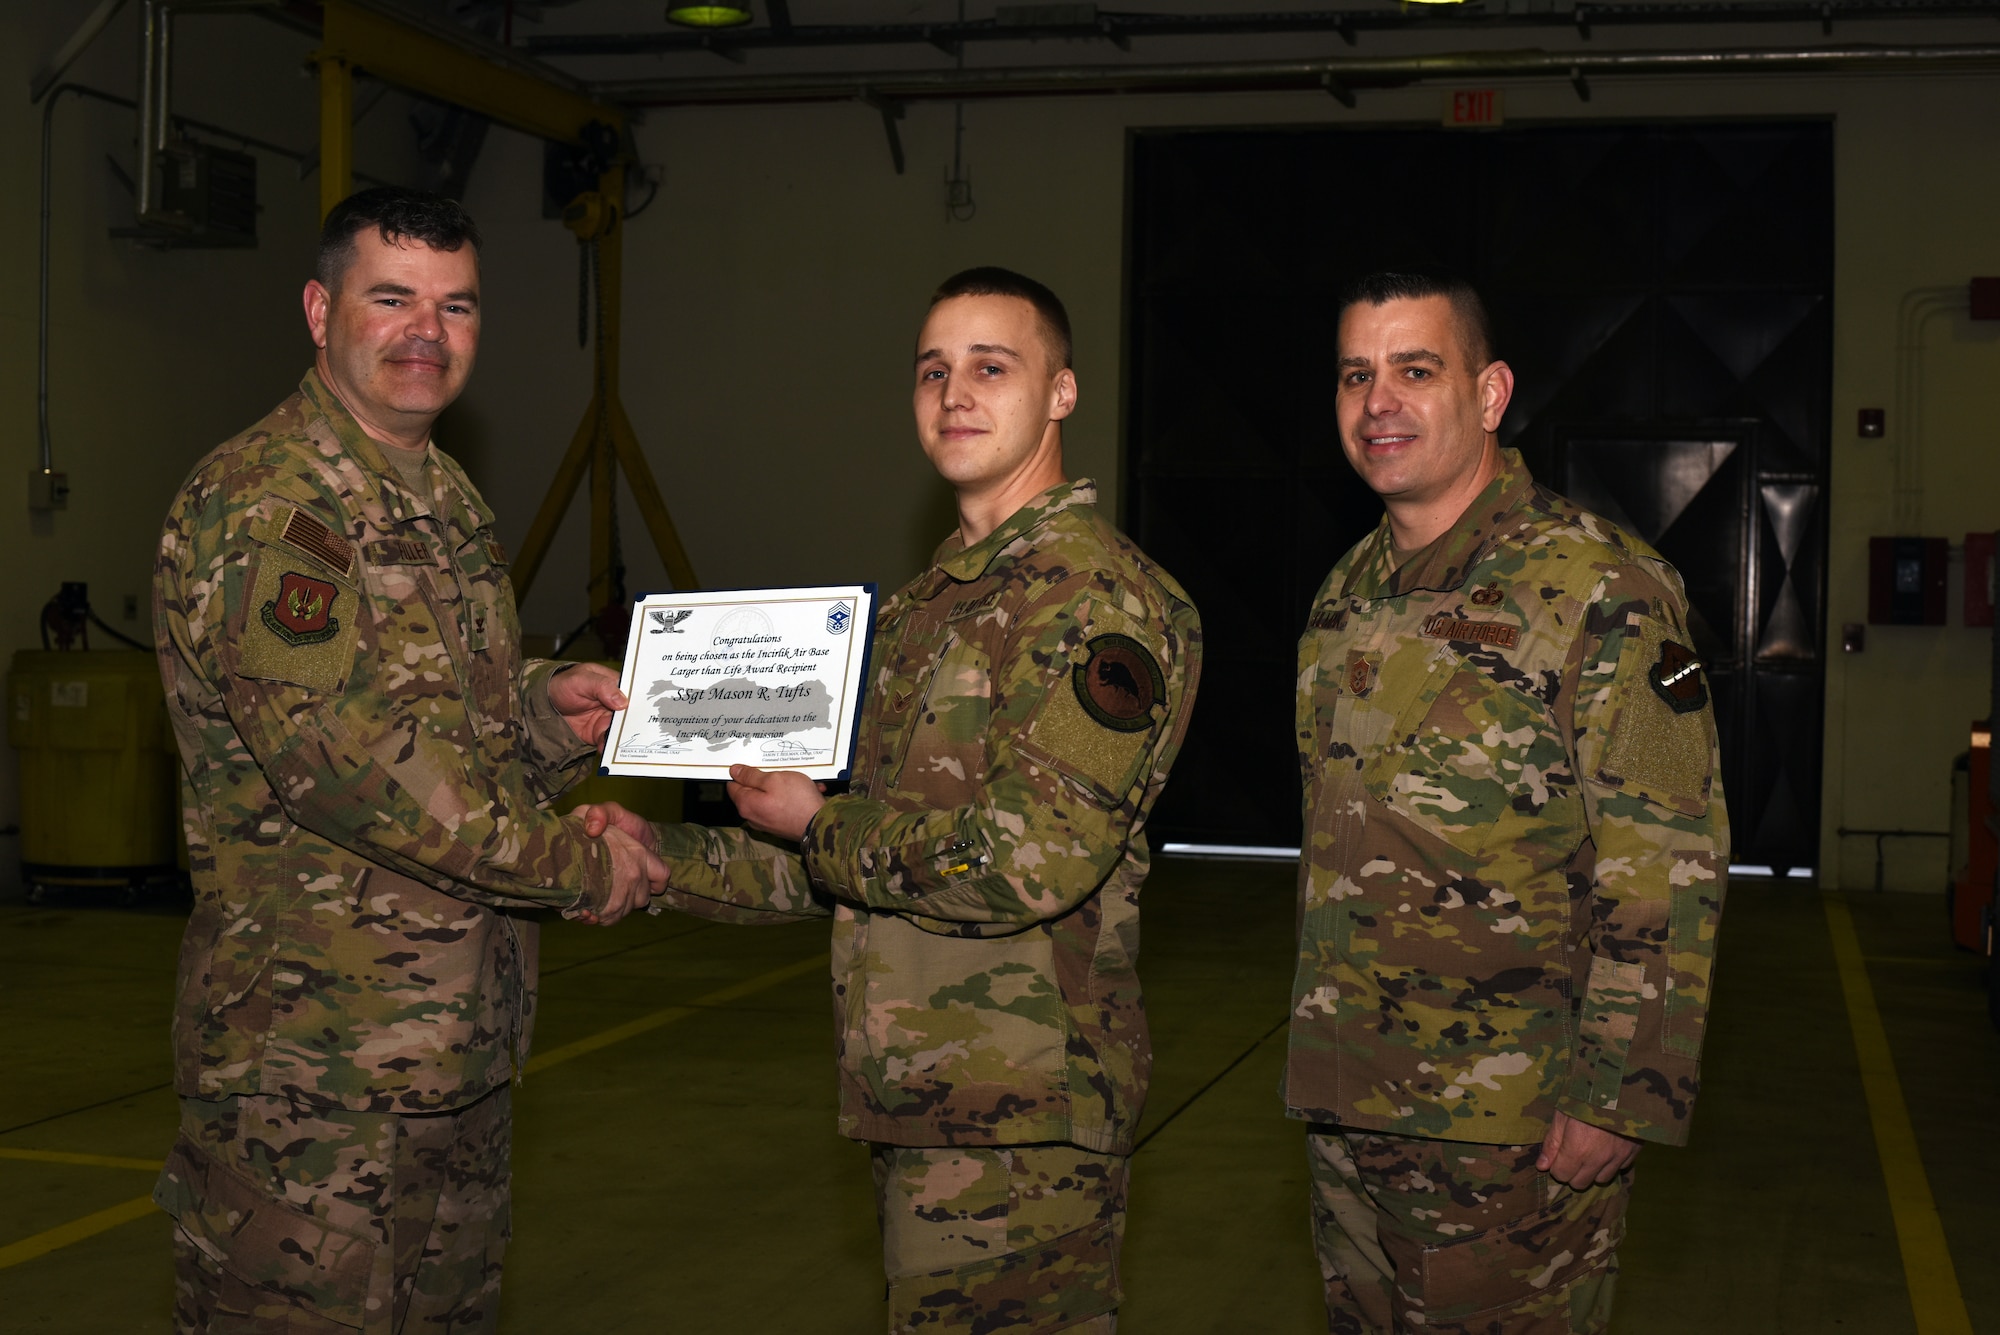 Col. Brian A. Filler, 39th Air Base Wing vice commander, left, and Chief Master Sgt. Jason T. Heilman, 39th Air Base Wing command chief, right, present the Larger Than Life Award to Staff Sgt. Mason Tufts, 39th Maintenance Squadron aerospace ground equipment journeyman, at Incirlik Air Base, Turkey, Mar. 6, 2019.